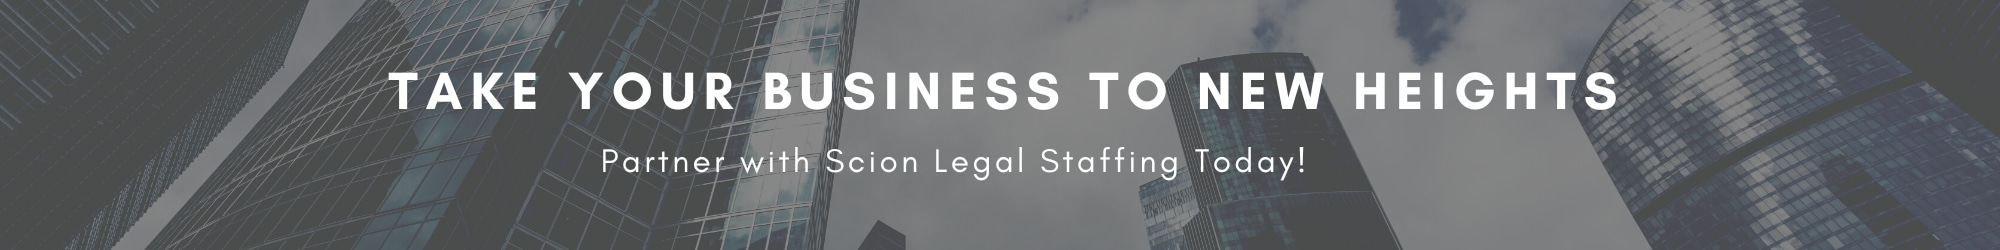 Partner with Scion legal staffing and take your business to new heights. Skyscrapers pictured behind those words.